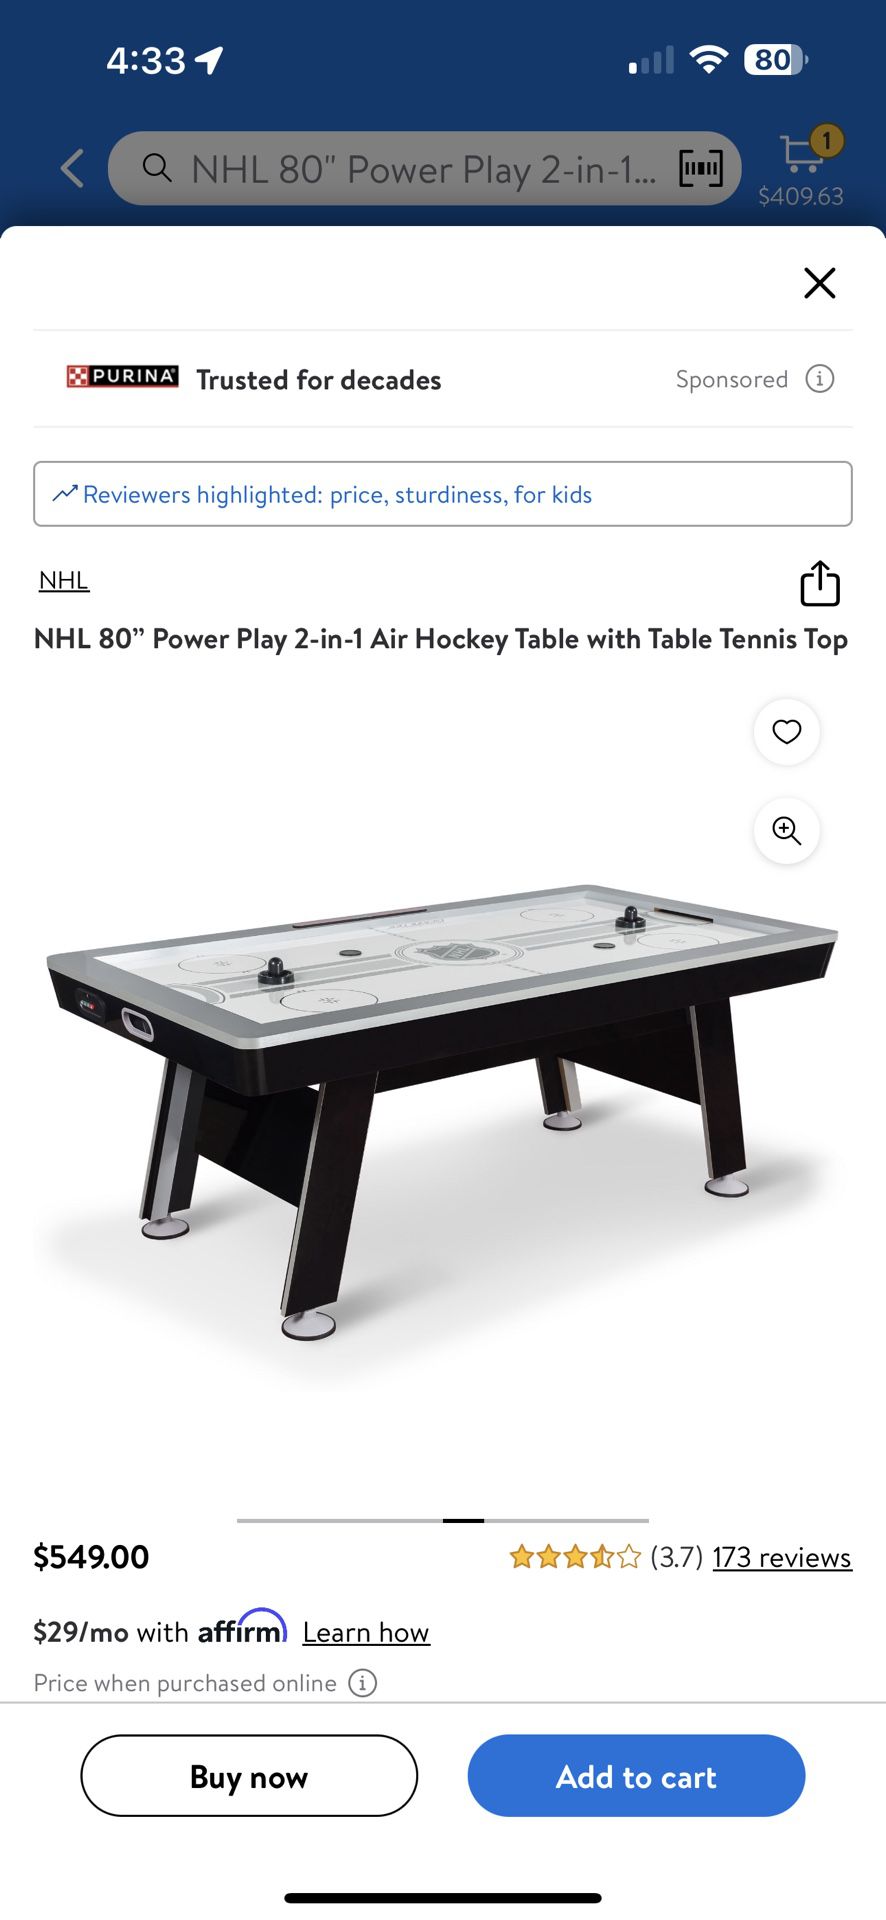 NHL 80" Power Play 2-in-1 Air Hockey Table with Table Tennis Top